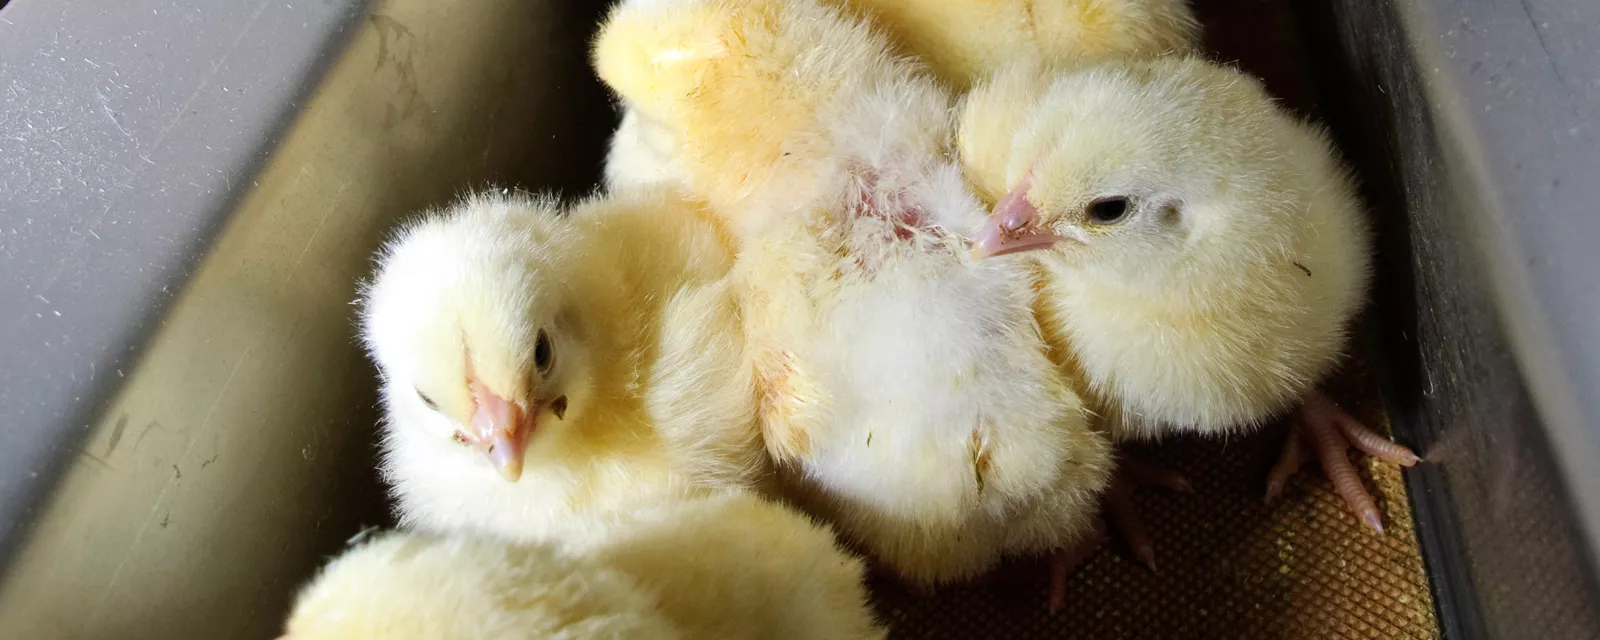 baby chicks about to be killed by chick culling practice